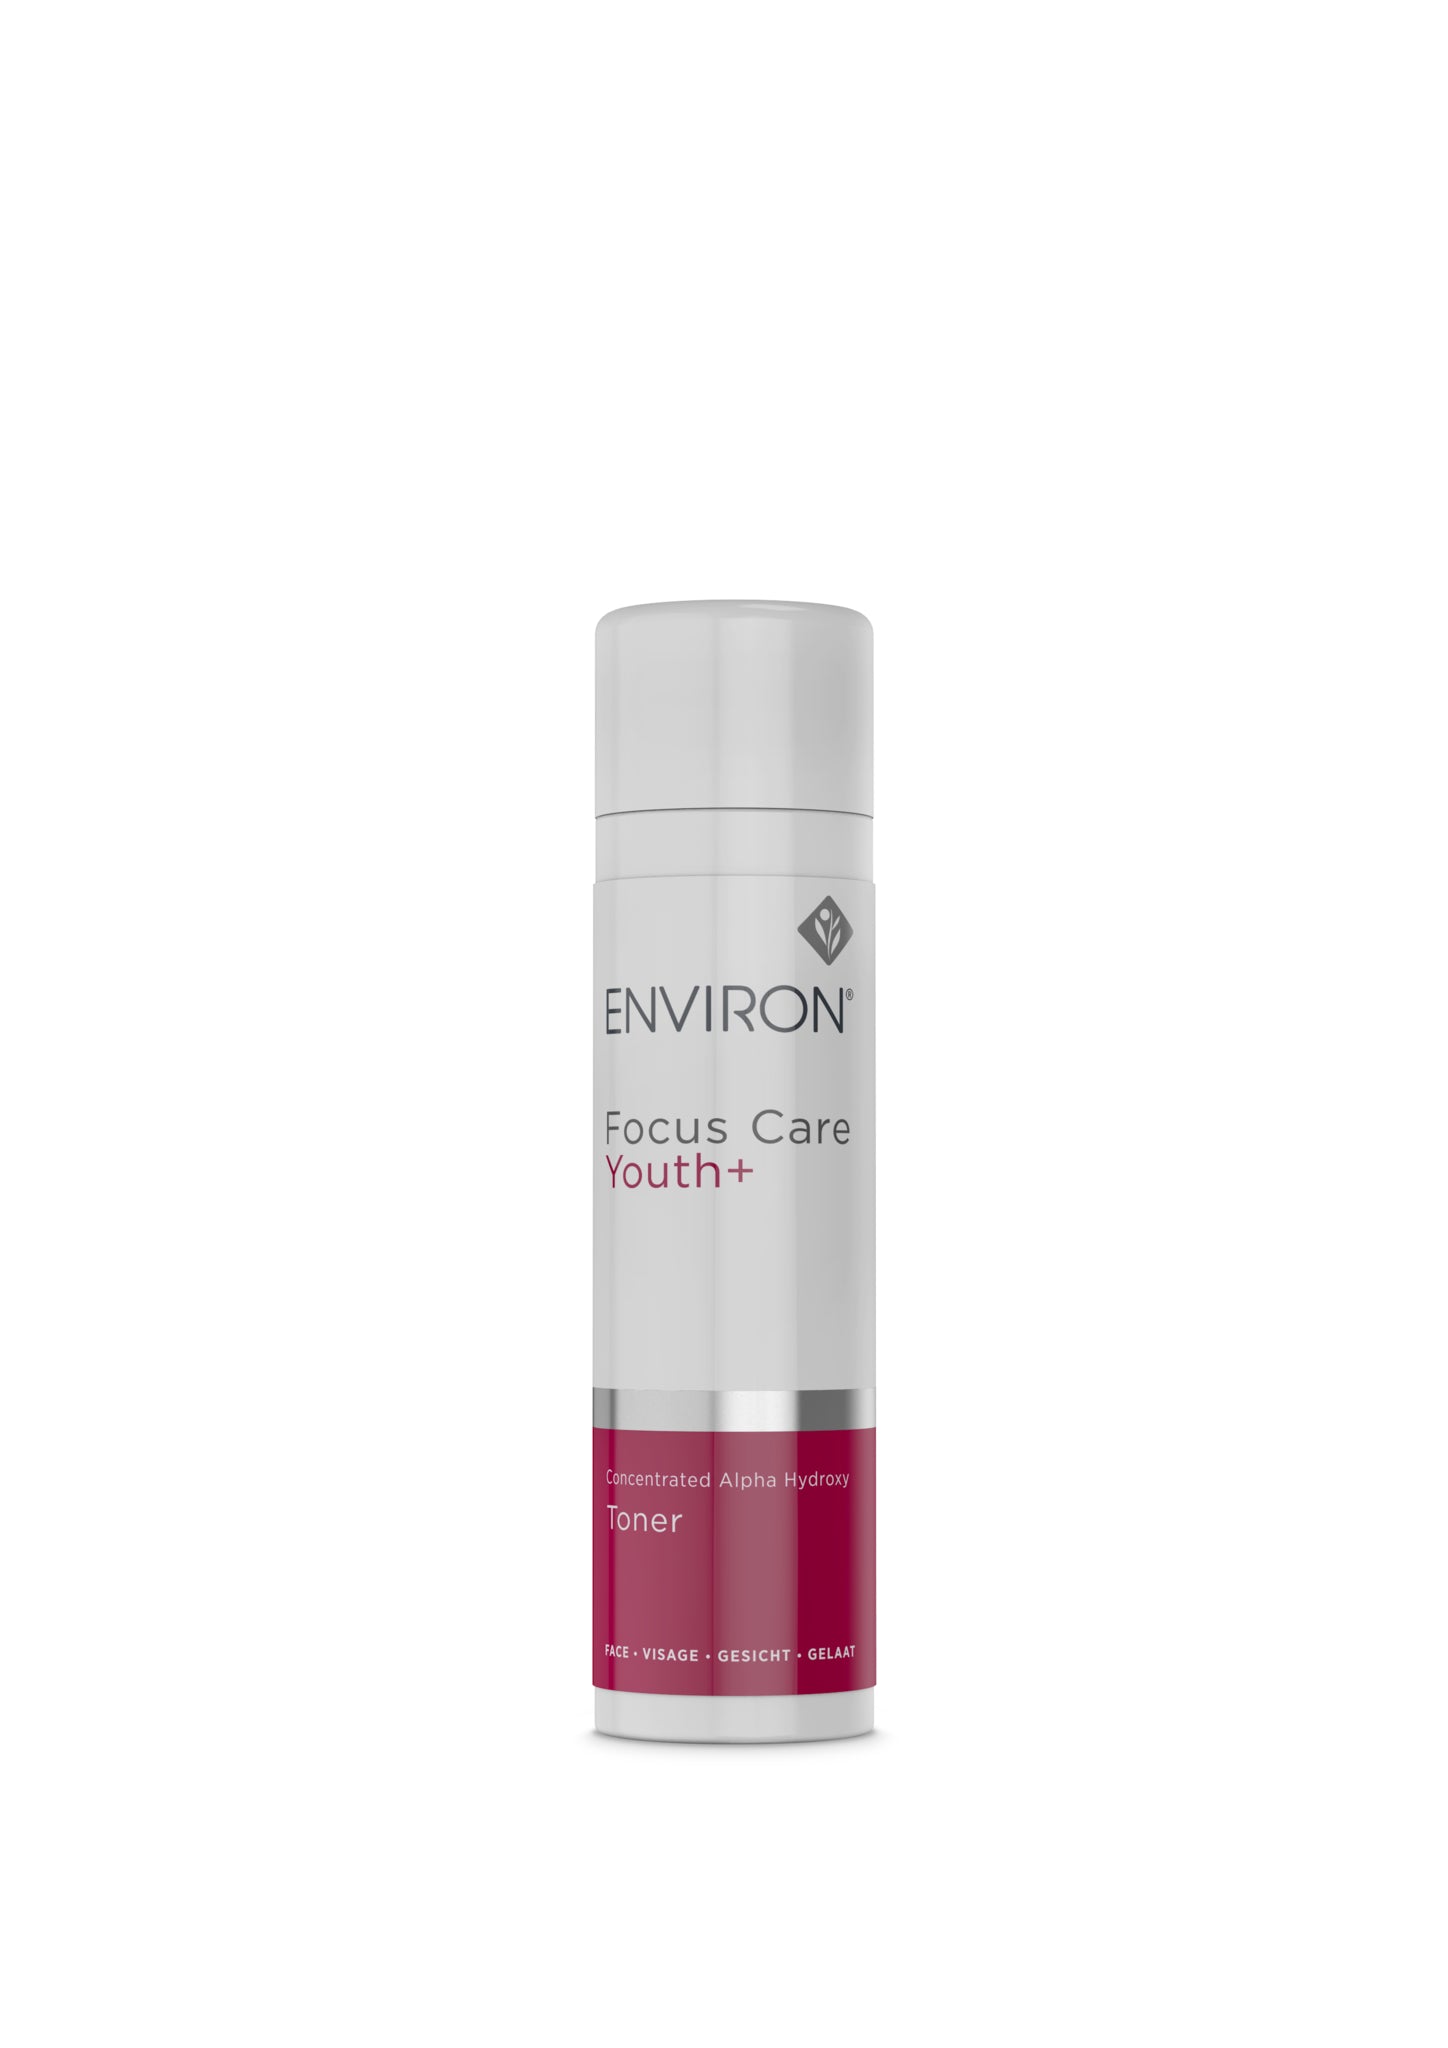 Environ Focus Care™ Youth+ range - Concentrated Alpha Hydroxy Toner